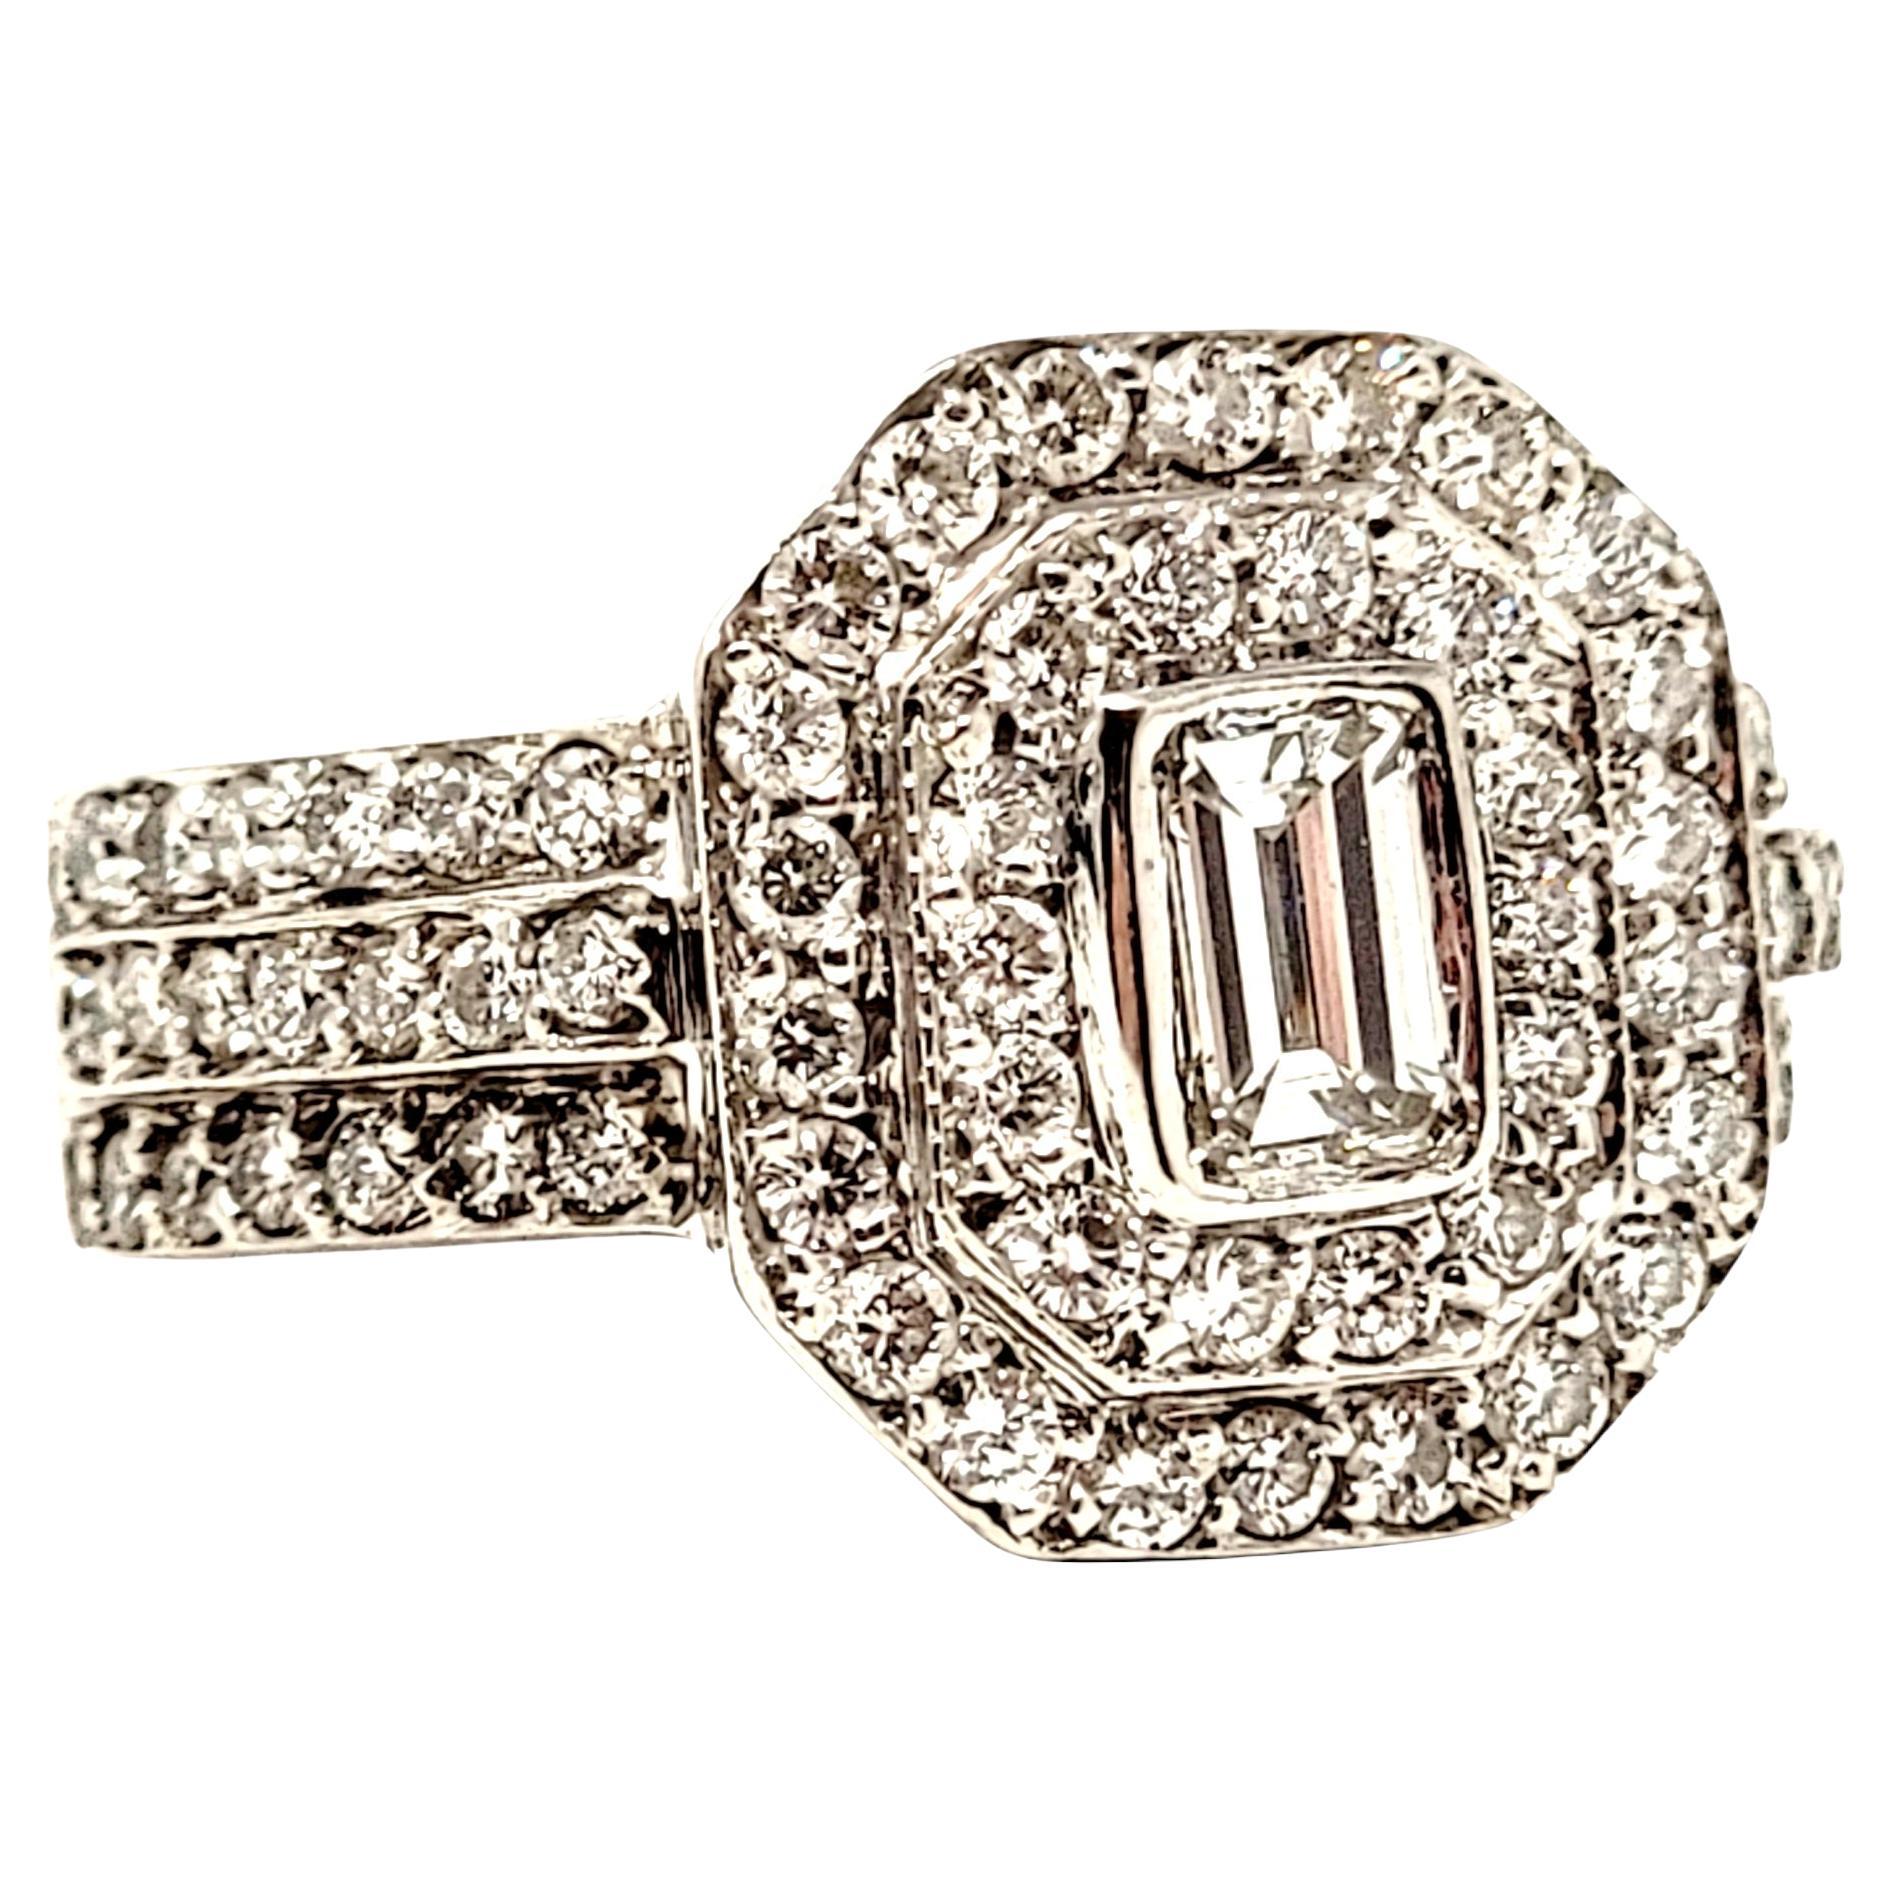 Double Halo Emerald Cut Diamond Multi Row Band Ring in 14 Karat White Gold For Sale